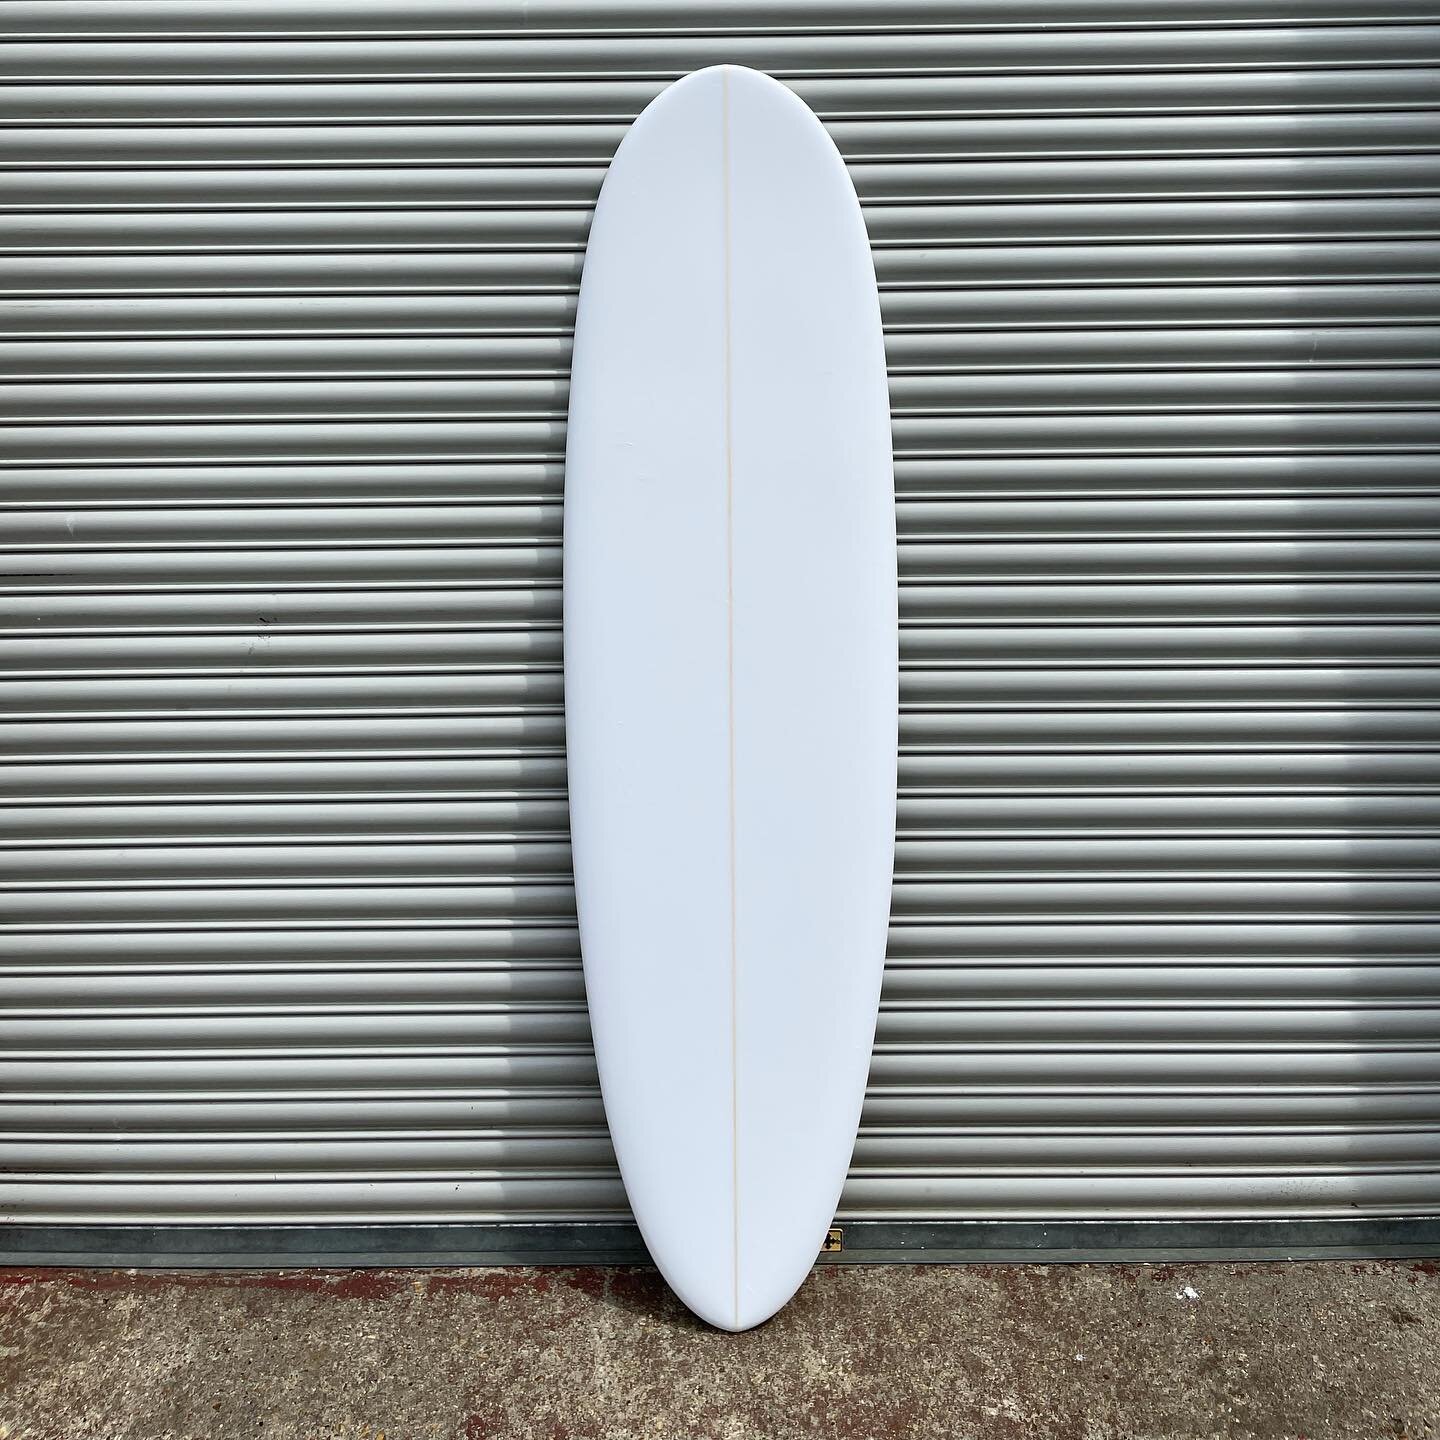 Available : Mid-length speed egg with edge in the tail &amp; tucked rail through out .. it&rsquo;s 7.1 but 23 wide to allow easy paddle ins &amp; glide when when you&rsquo;re not sure if it&rsquo;s log or mid-length day 🏴&zwj;☠️

#ahoysurfcraft #tha